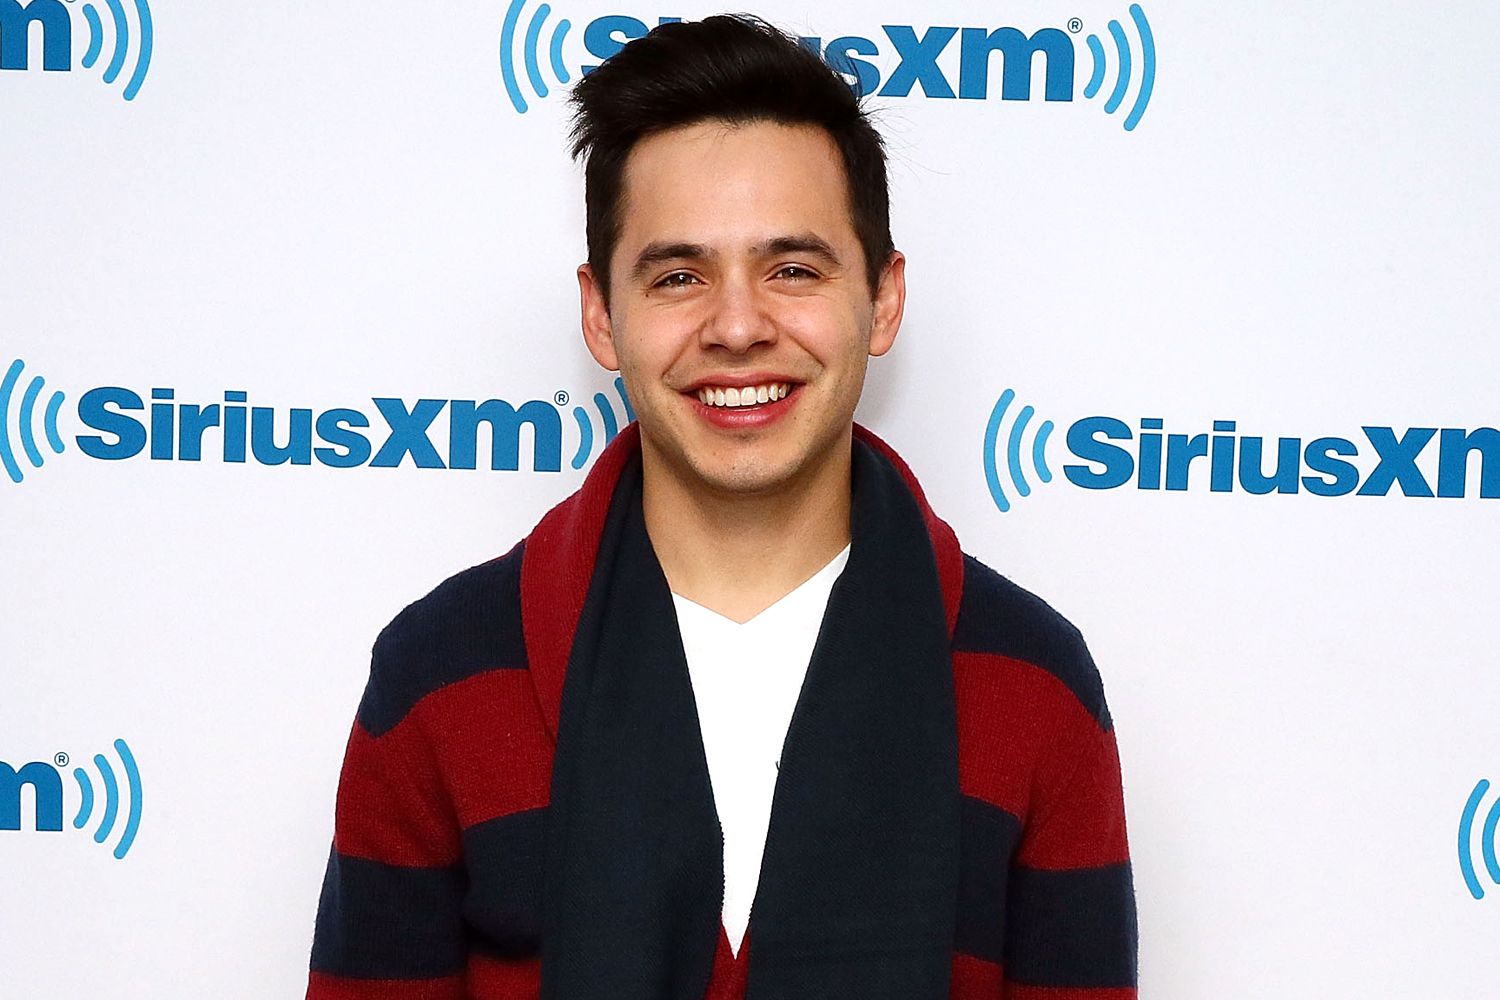 David Archuleta opens up about his faith, sexuality and coming out journey